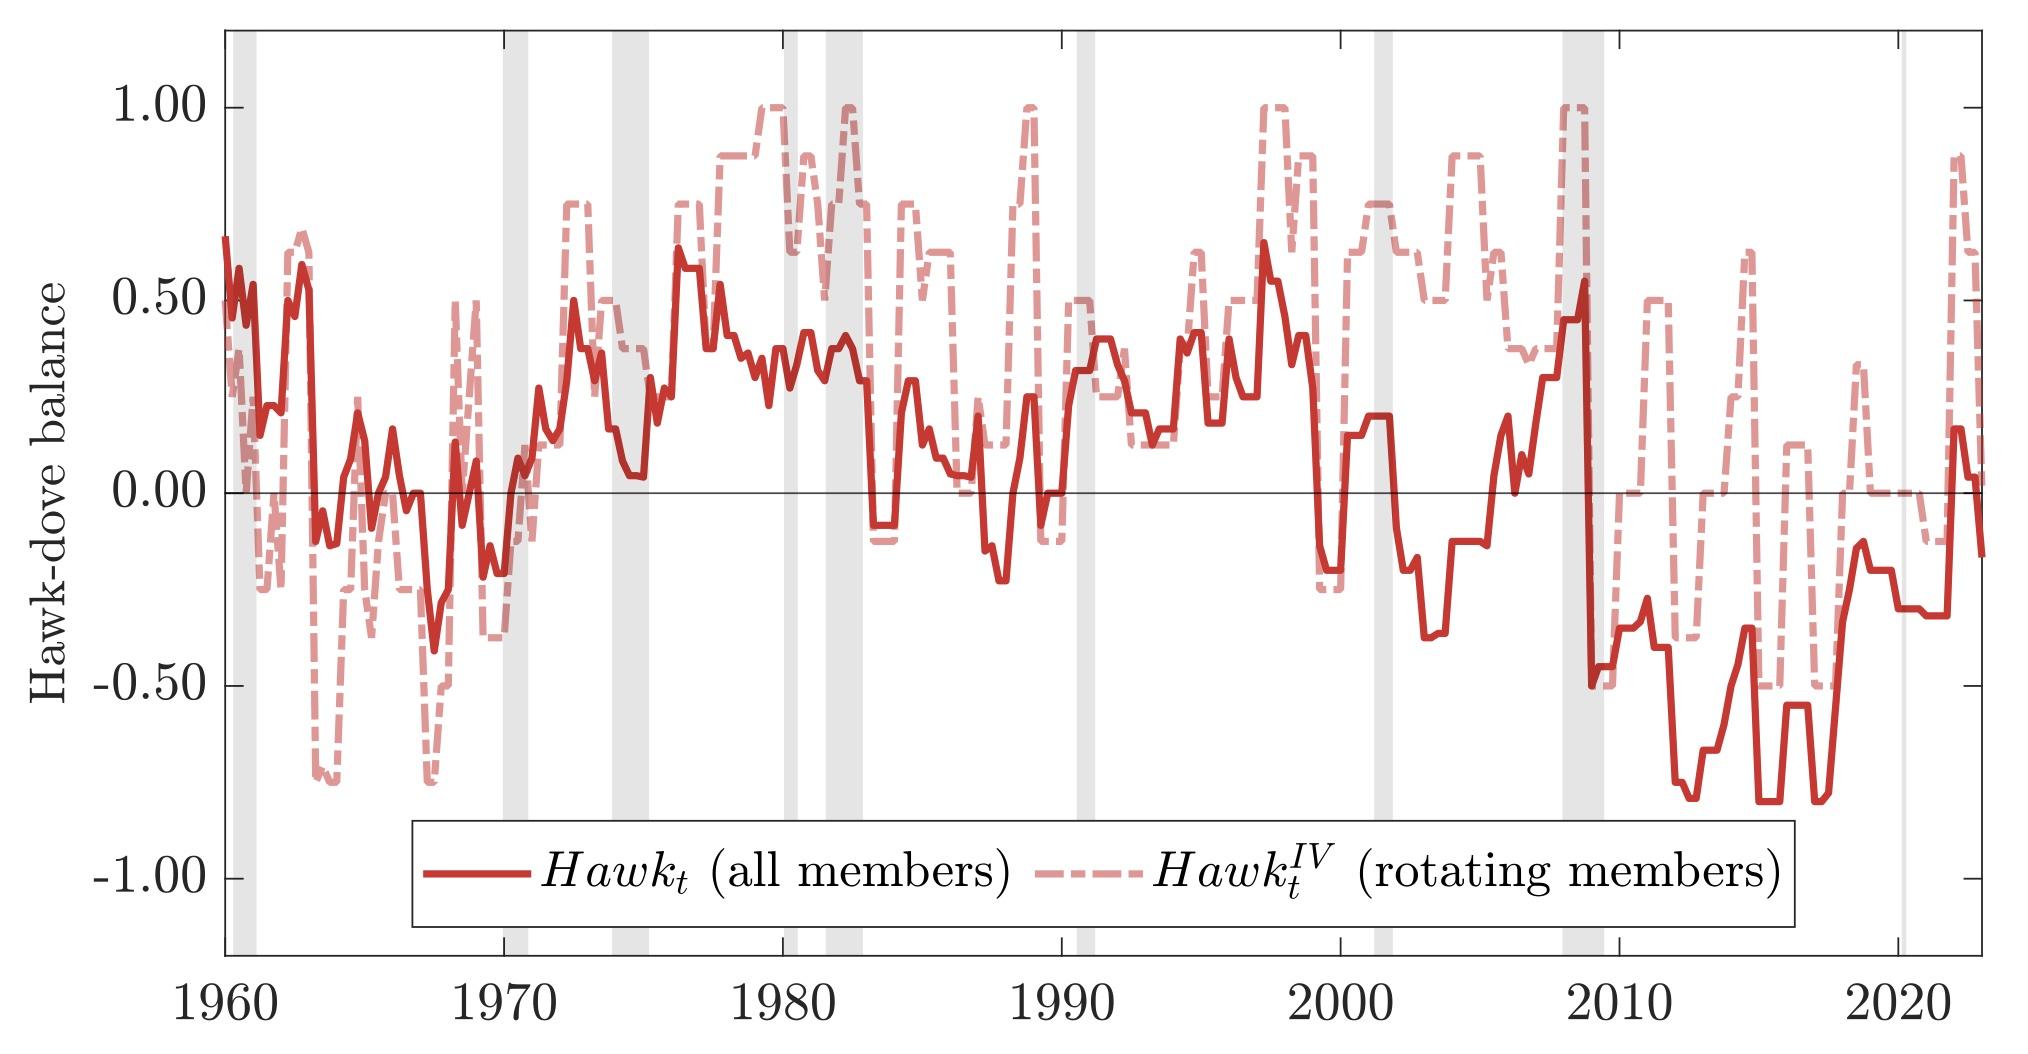 Figure 1 Historical variation in the Federal Reserve’s systematic monetary policy represented by the FOMC hawk-dove balance